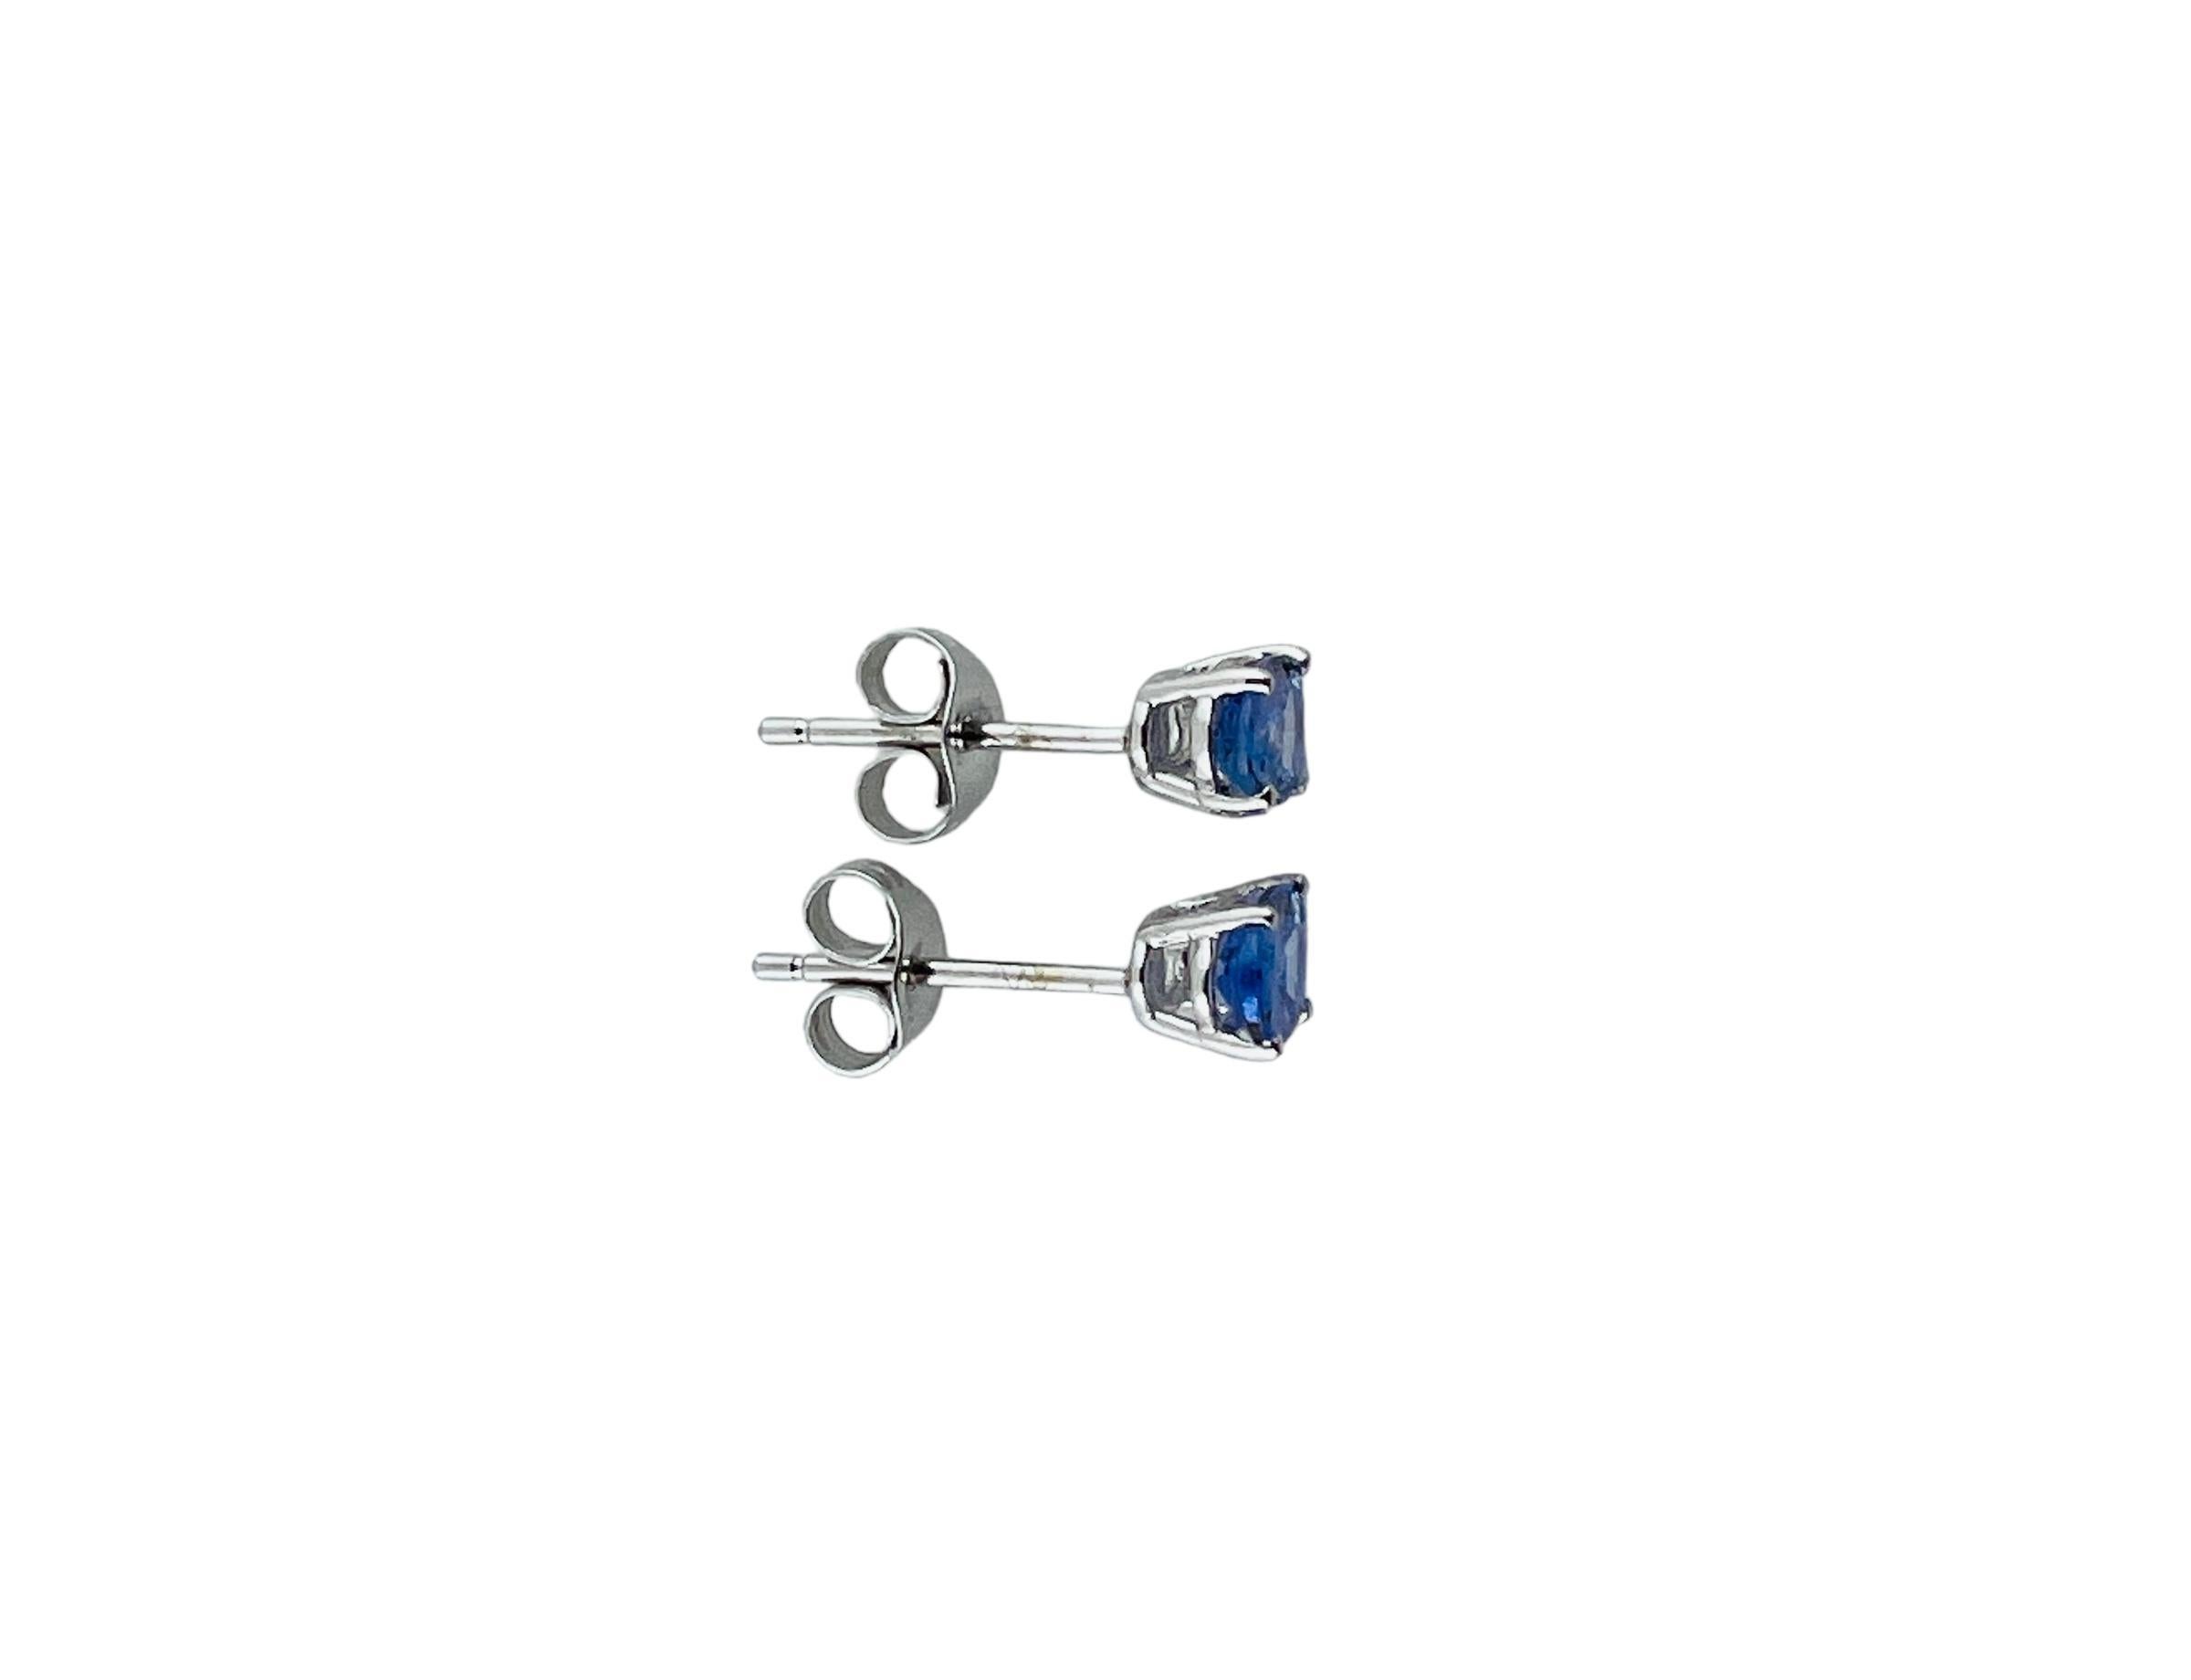 Vintage 10K White Gold Tanzanite Studs

Gorgeous set pf stud earrings with 2 marquise cut tanzanite stones!

Size: 5.8mm X 4.0mm X 3.8mm

Weight: 0.7 g/ 0.4 dwt

Tested 10K

JL 10312023

Very good condition, professionally polished.

Will be